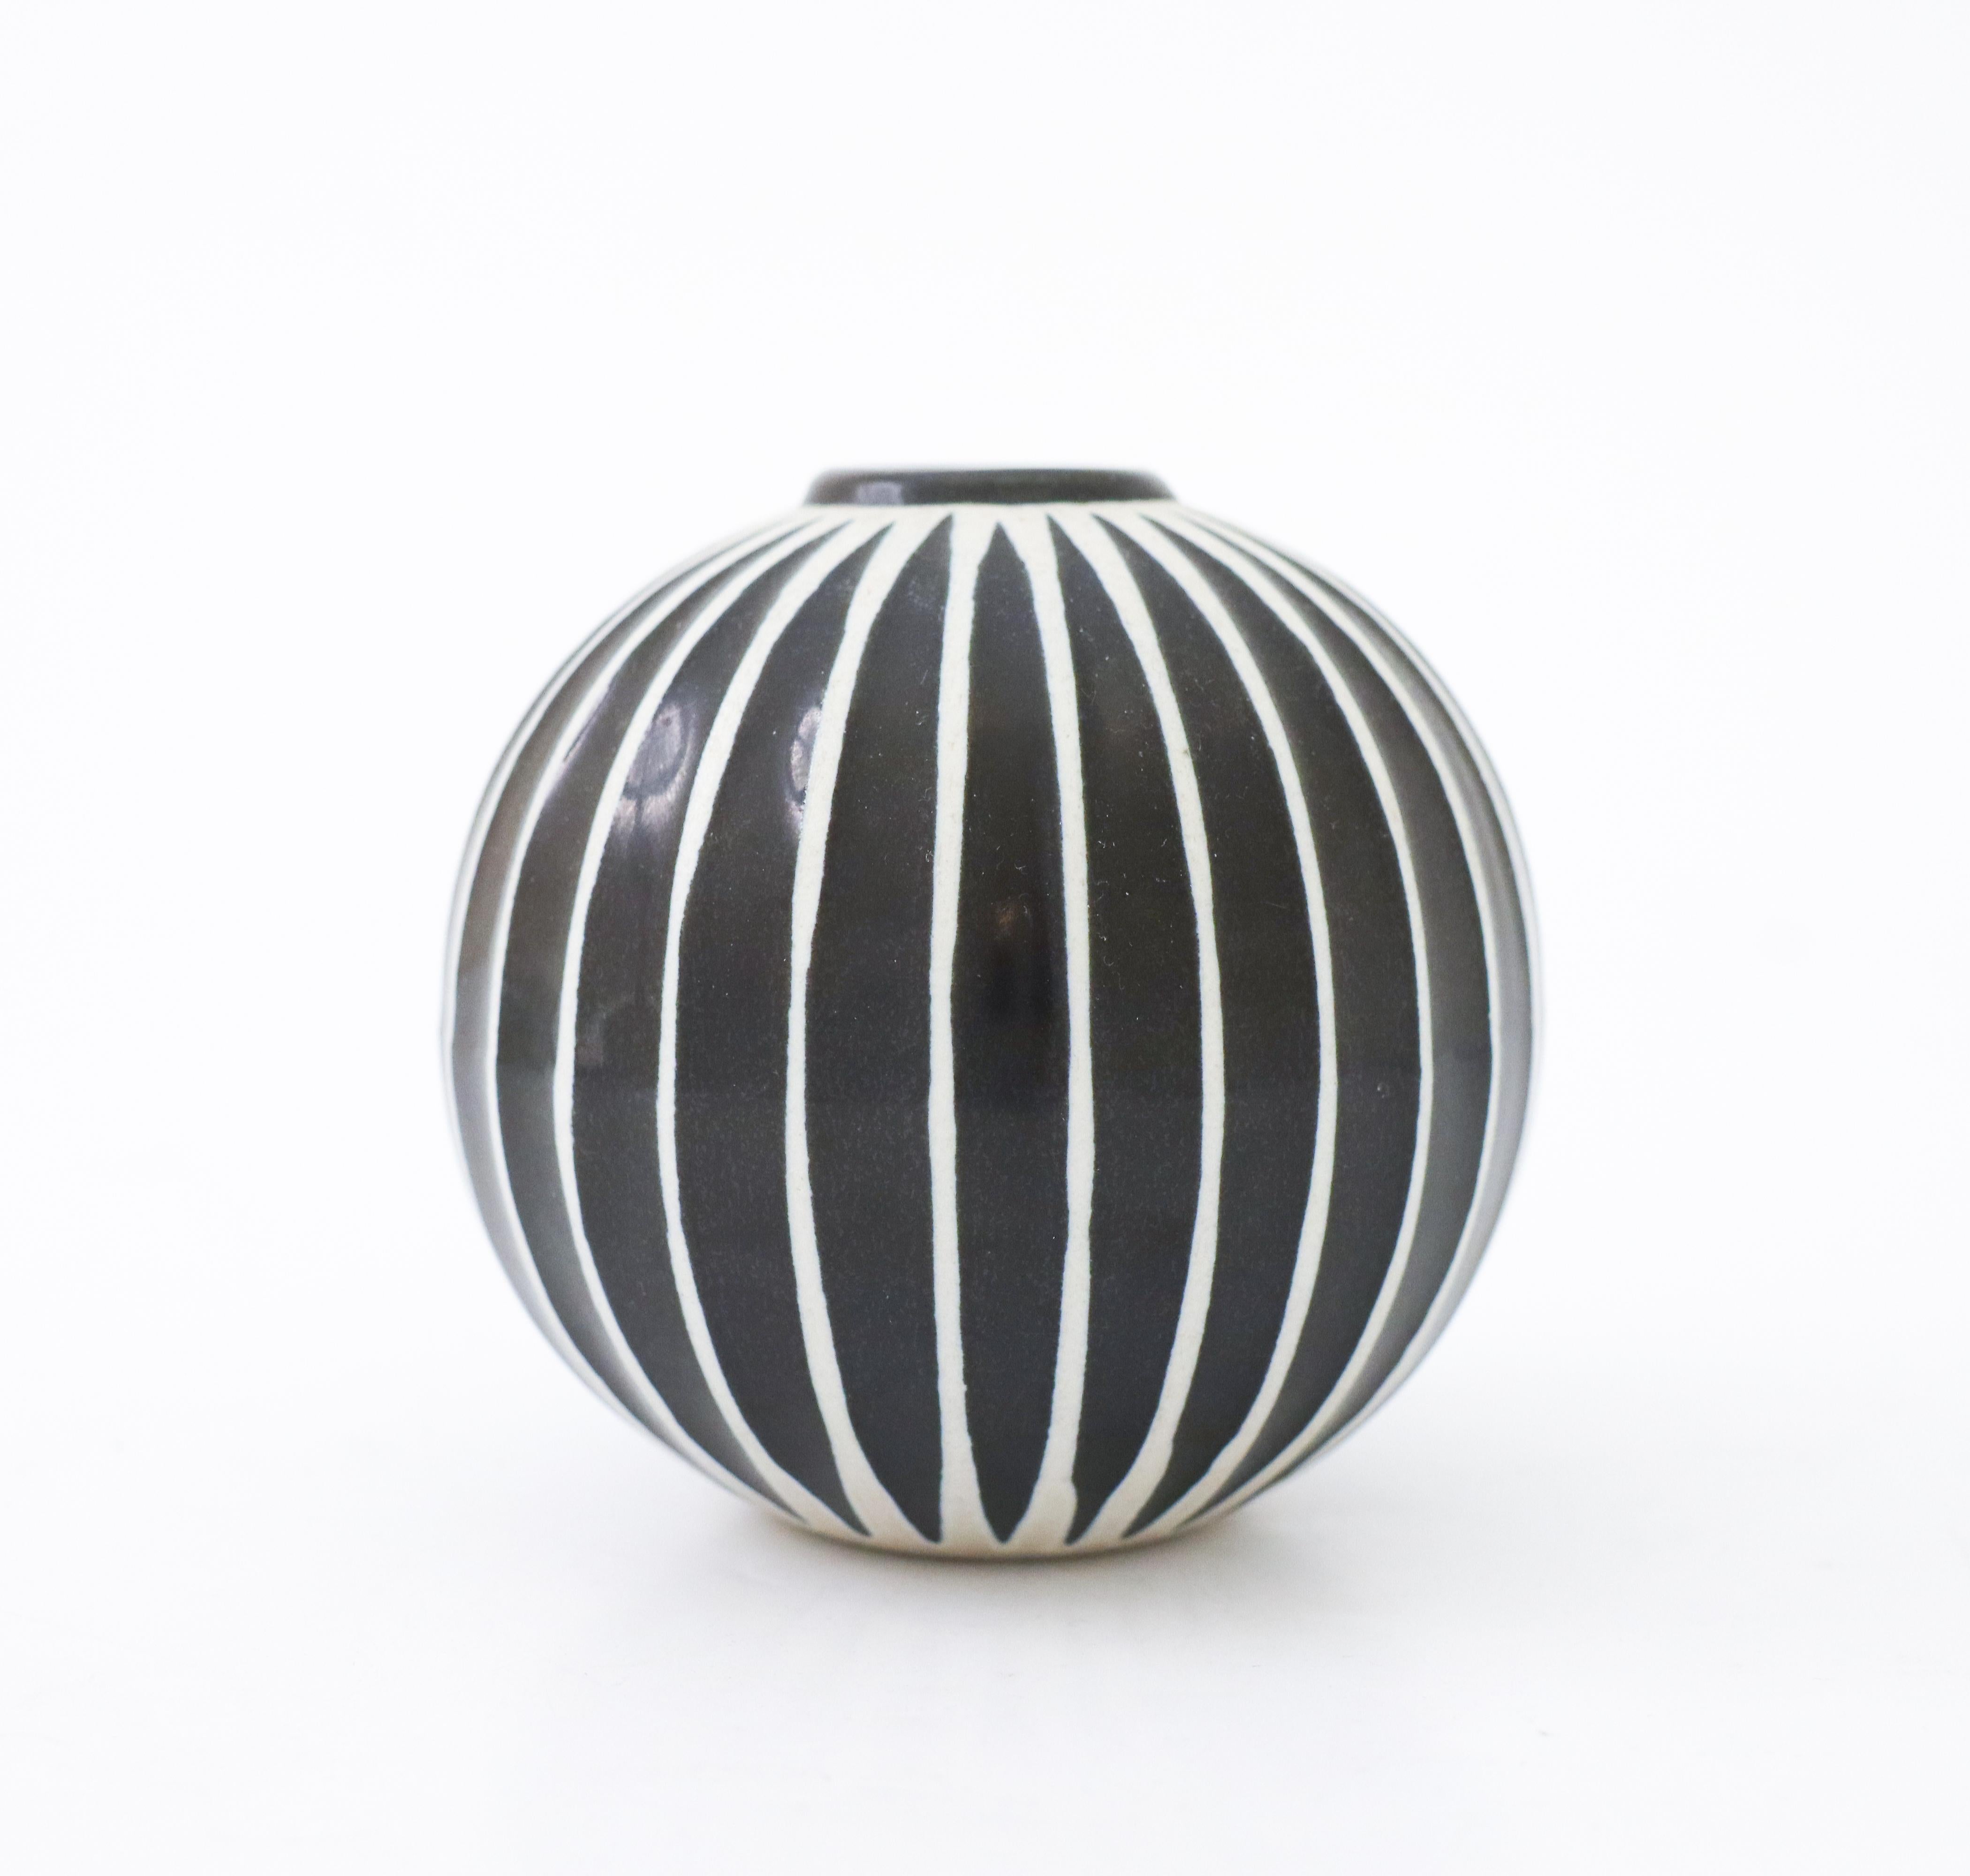 A lovely globose vase designed by Stig Lindberg at Gustavsberg. It is 9.5 cm in diameter. It is close to mint condition and one of the most iconically designs from the 1950s. 

The Domino serie was created by Stig Lindberg in 1954 to the large